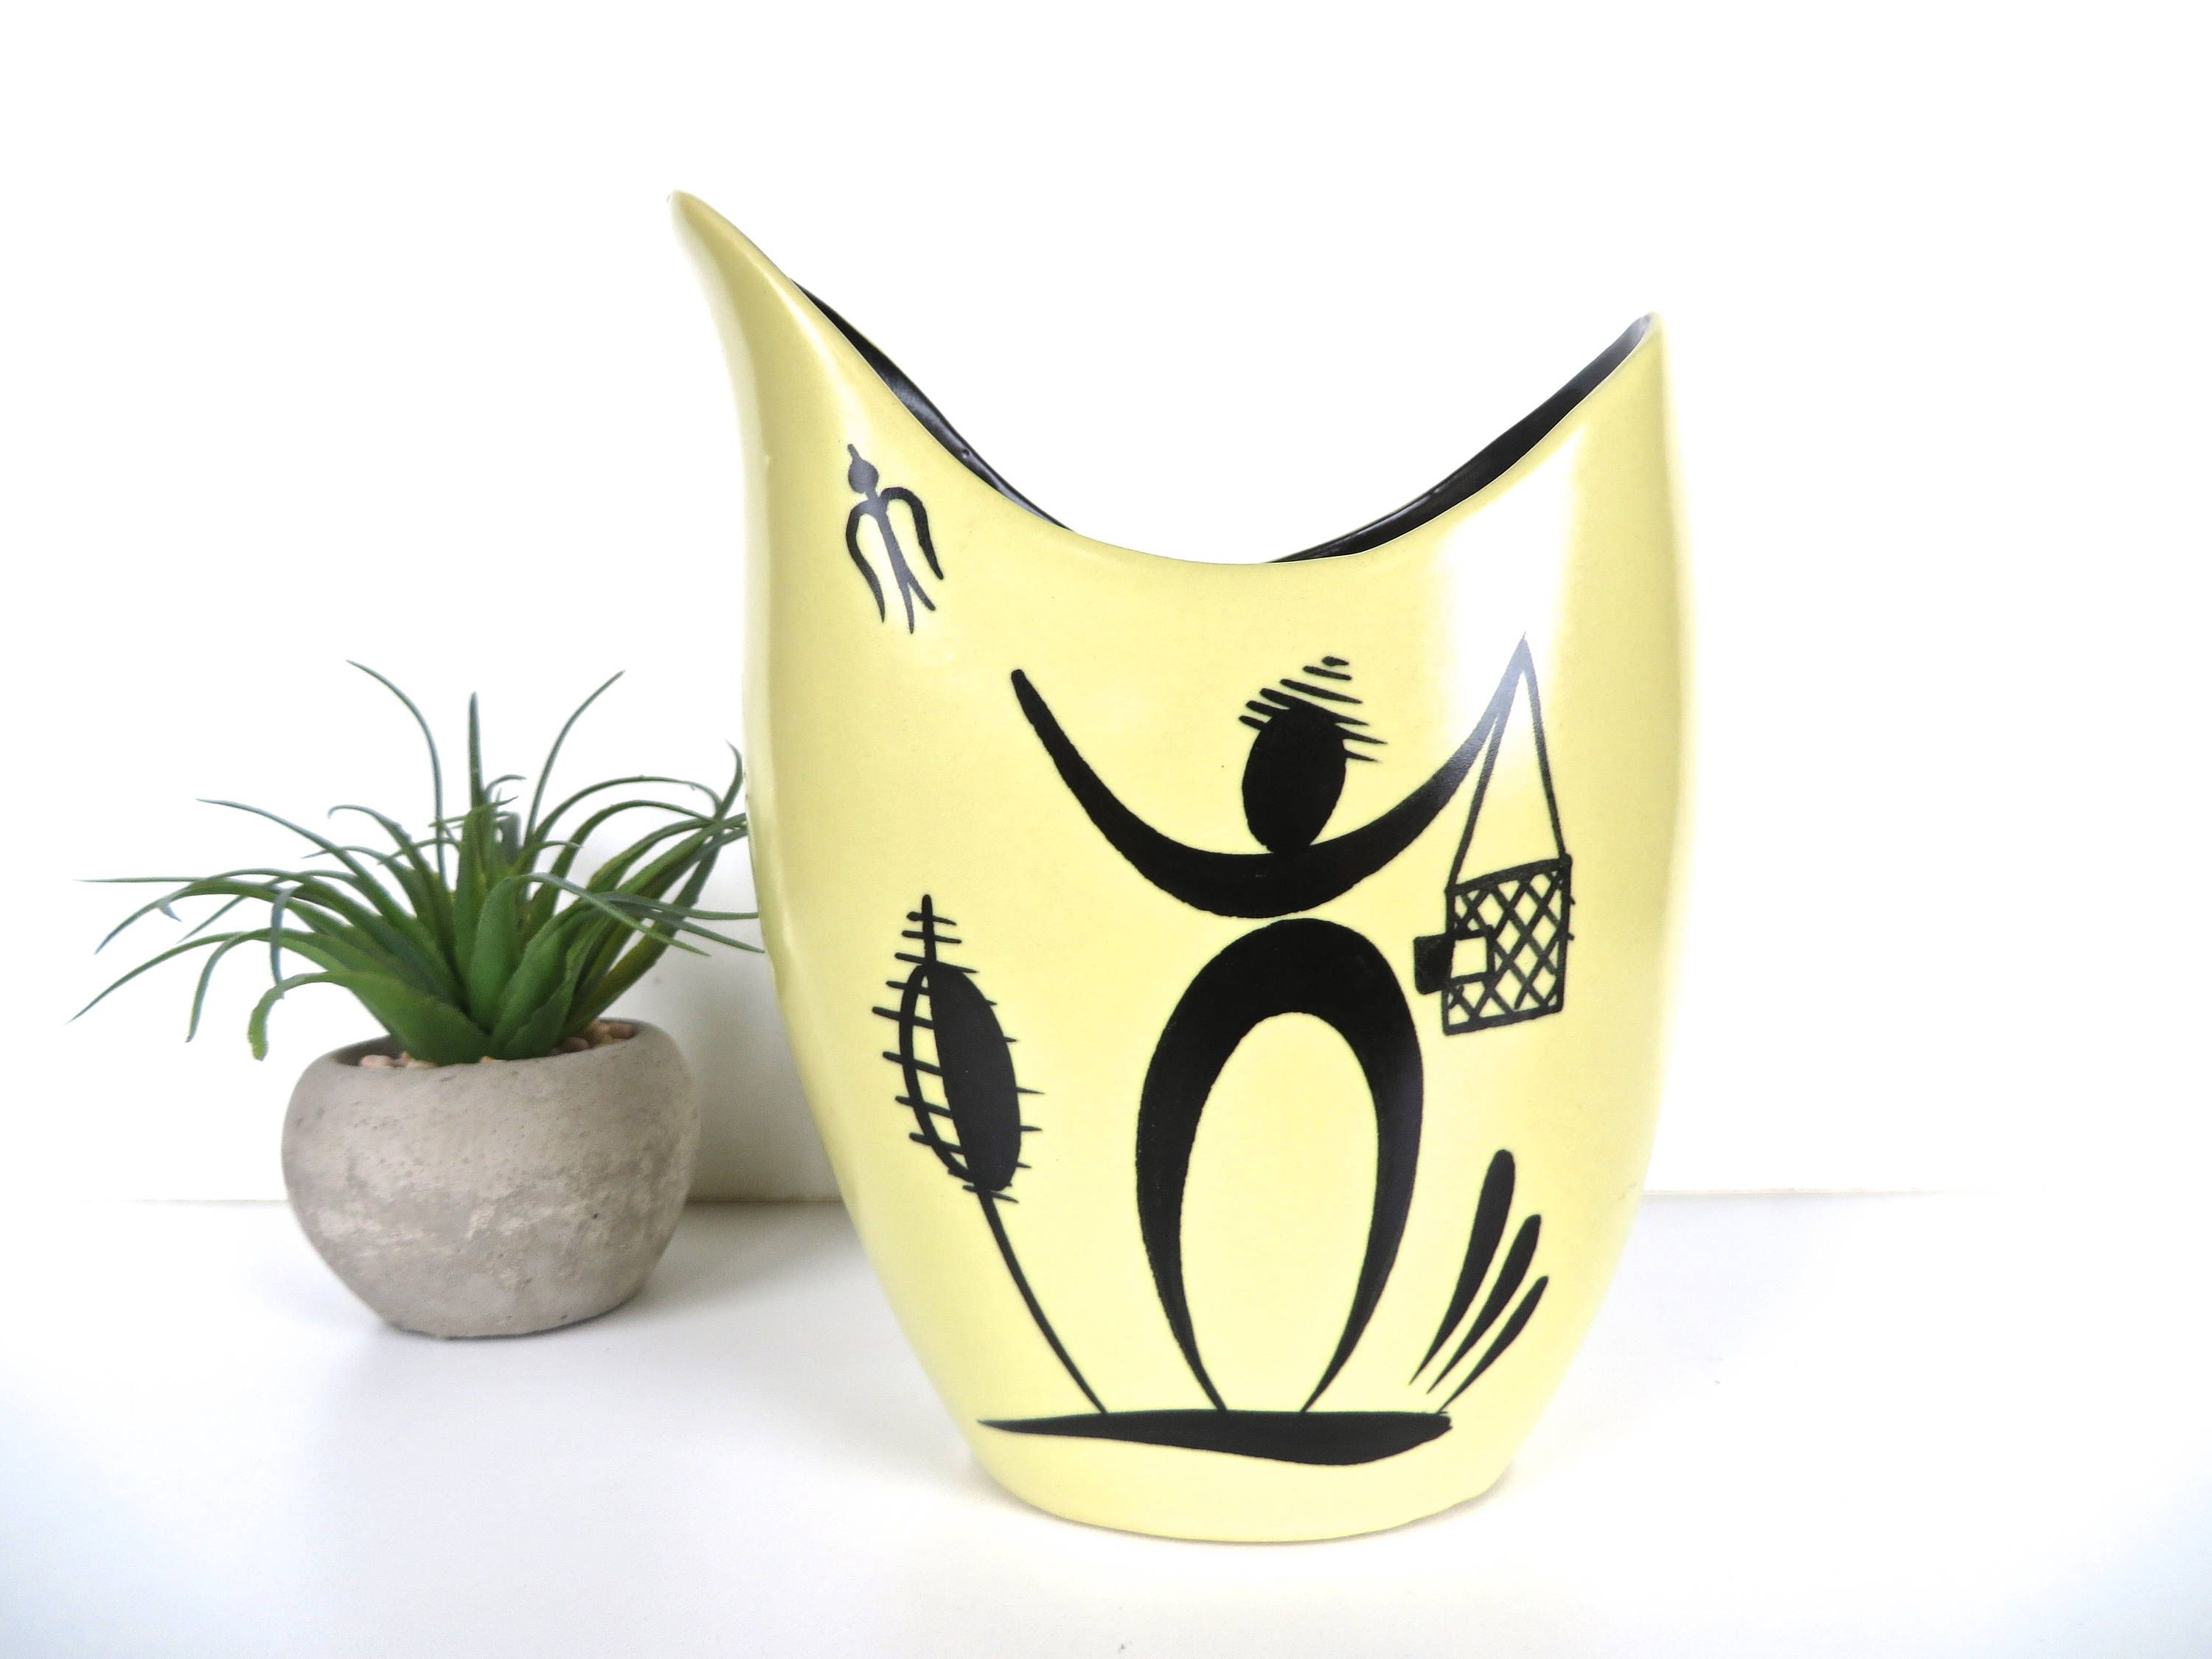 27 Spectacular Small Yellow Vase 2024 free download small yellow vase of petrus regout maastrich royal dutch art vase from holland wim with petrus regout maastrich royal dutch art vase from holland wim visser sphinx ceramics holland yellow an